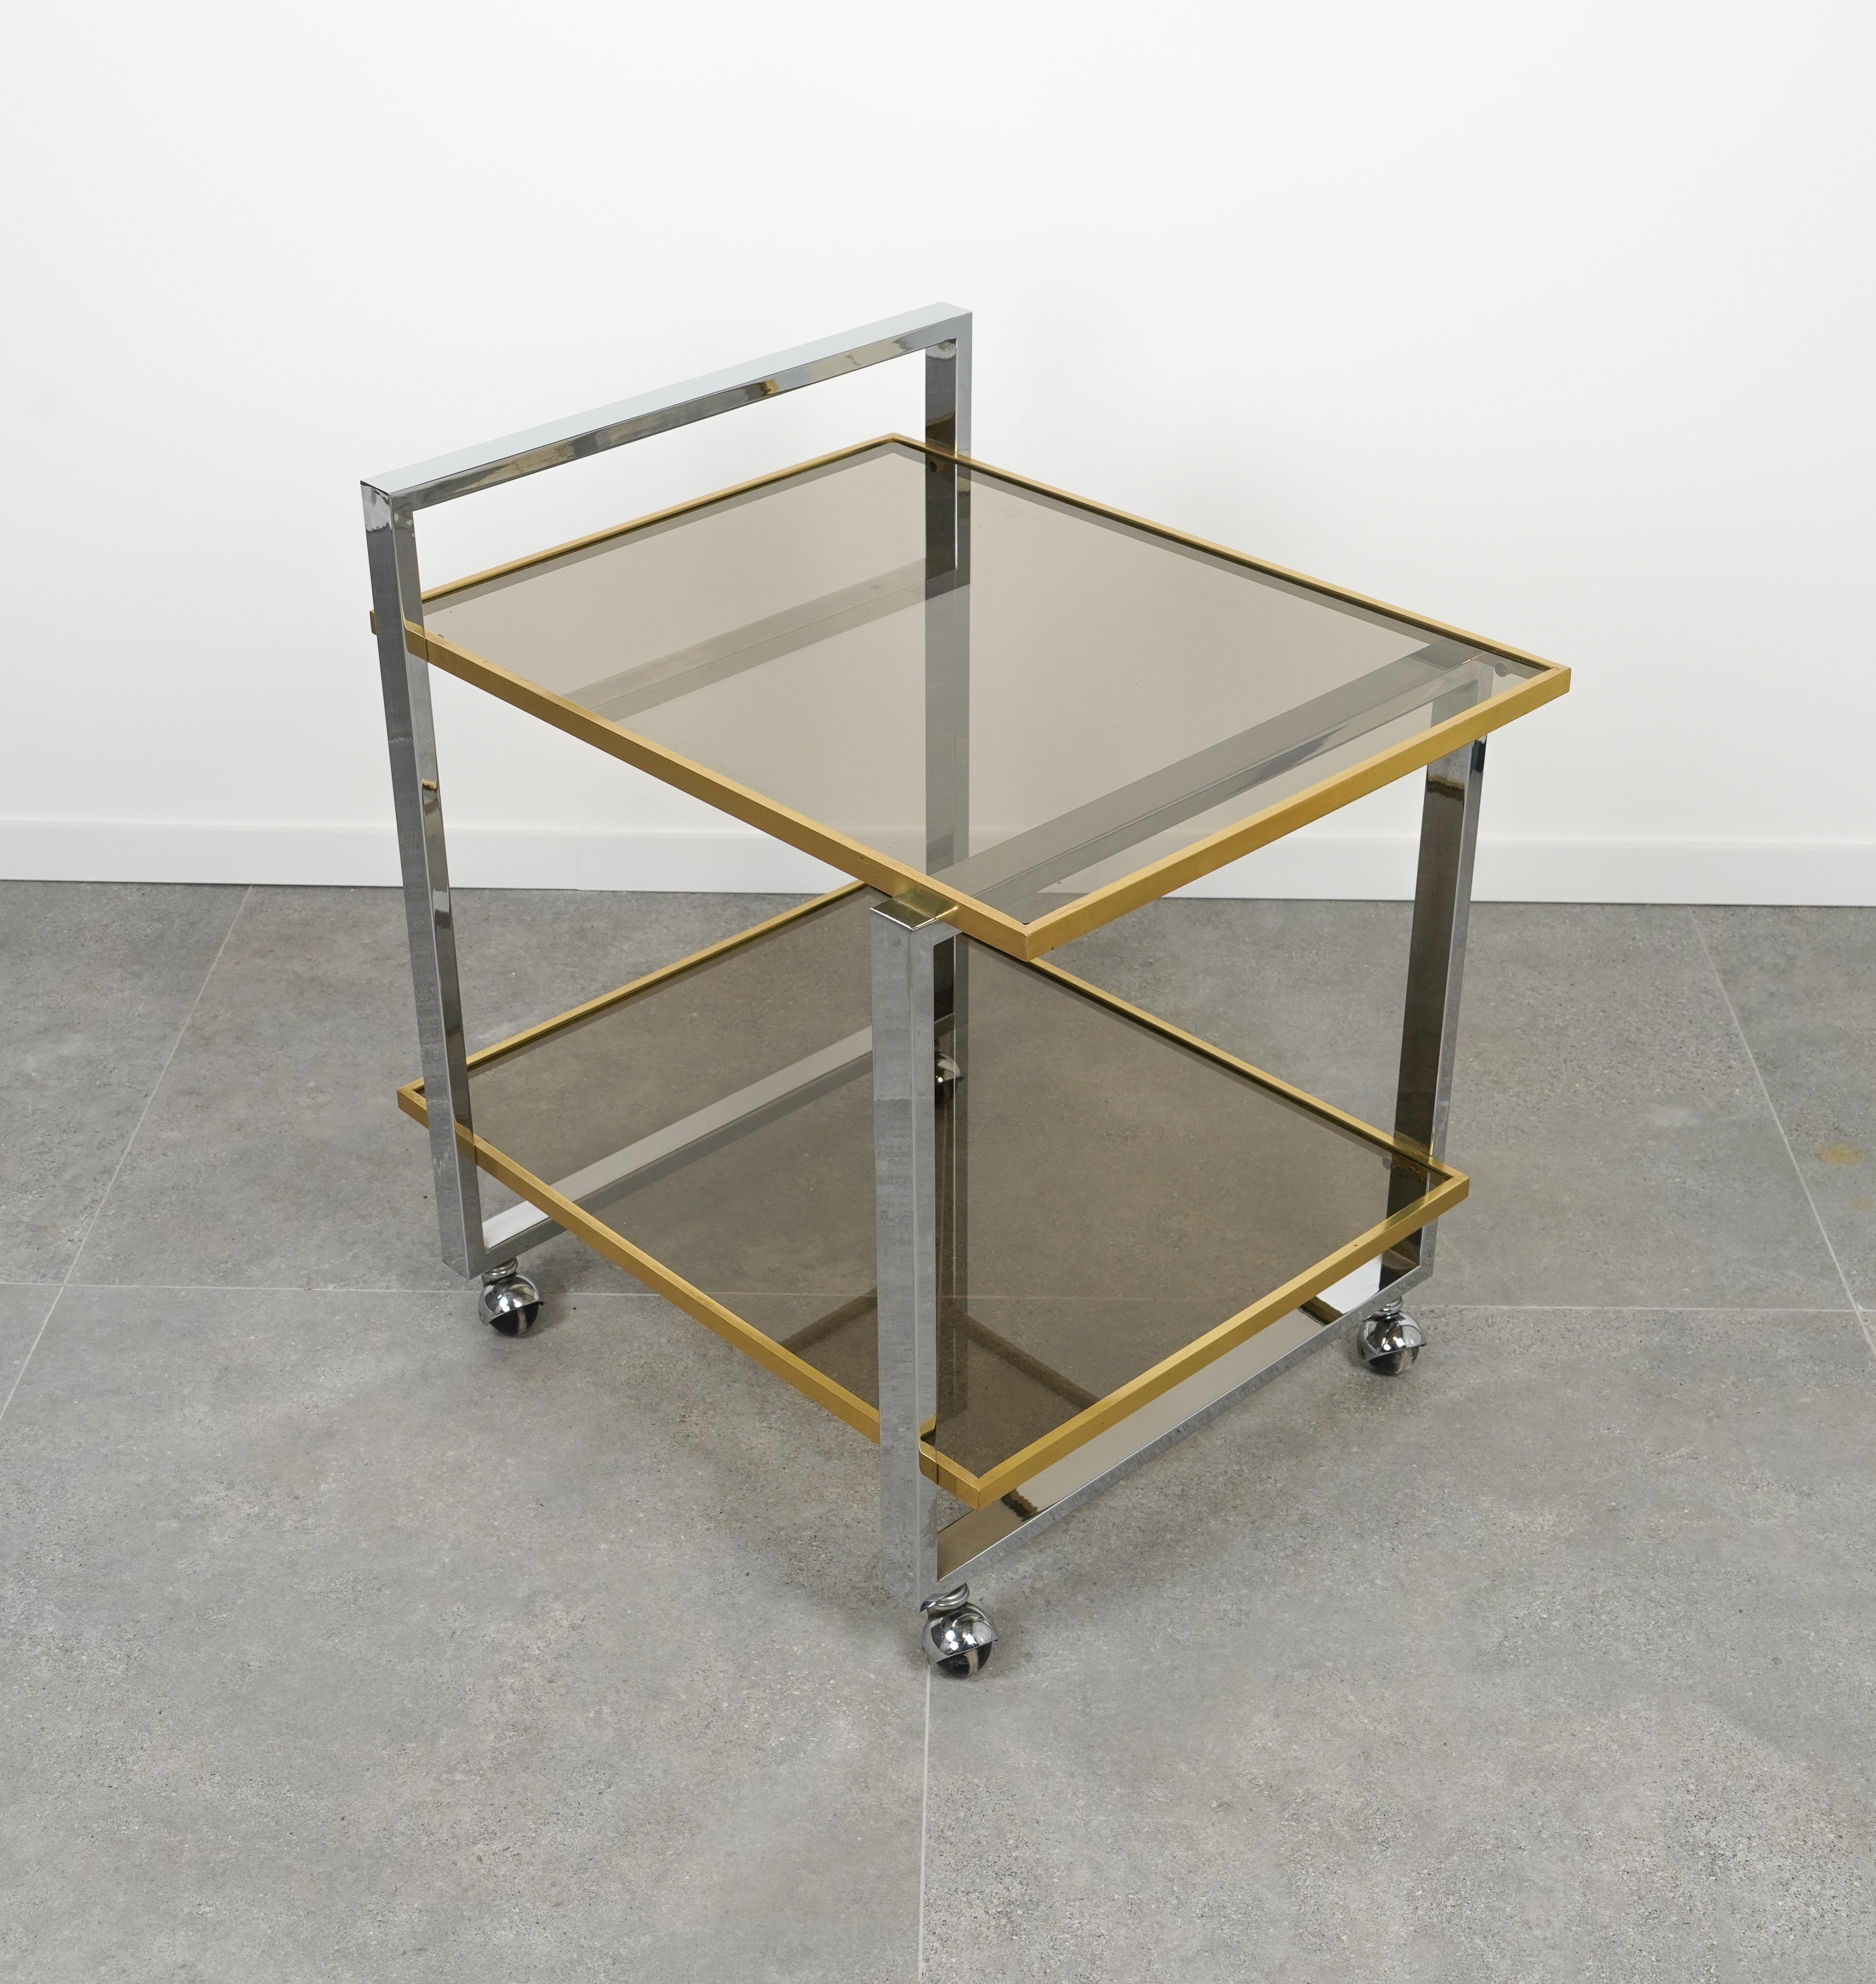 Metal Midcentury Serving Cart in Chrome, Brass and Glass by Romeo Rega, Italy 1970s For Sale